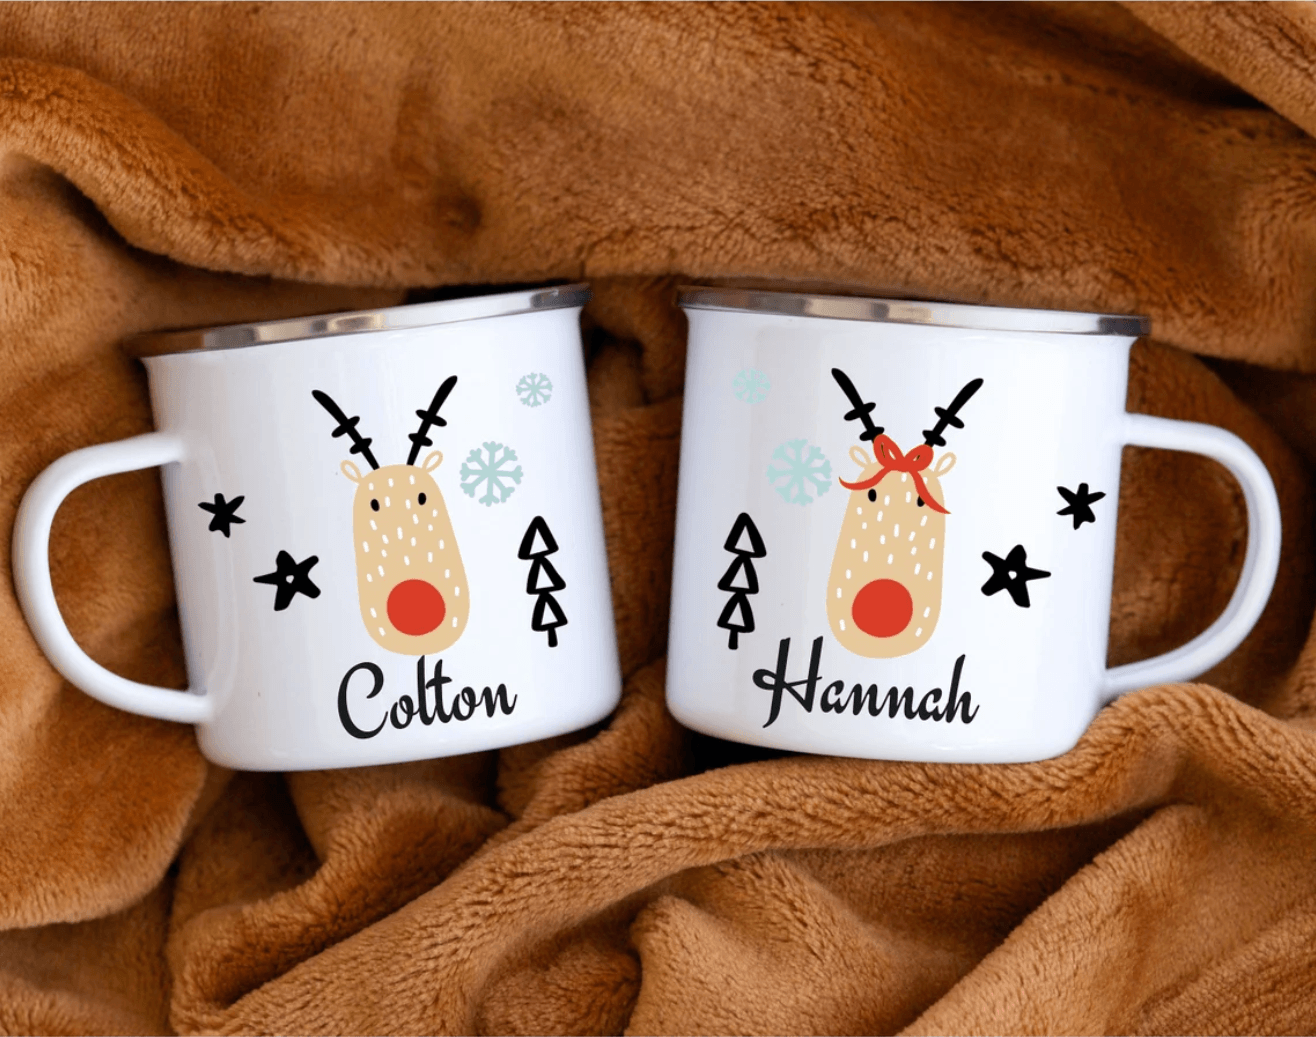 10 Kids' Christmas Mugs That Make The Holidays Cozier - Motherly